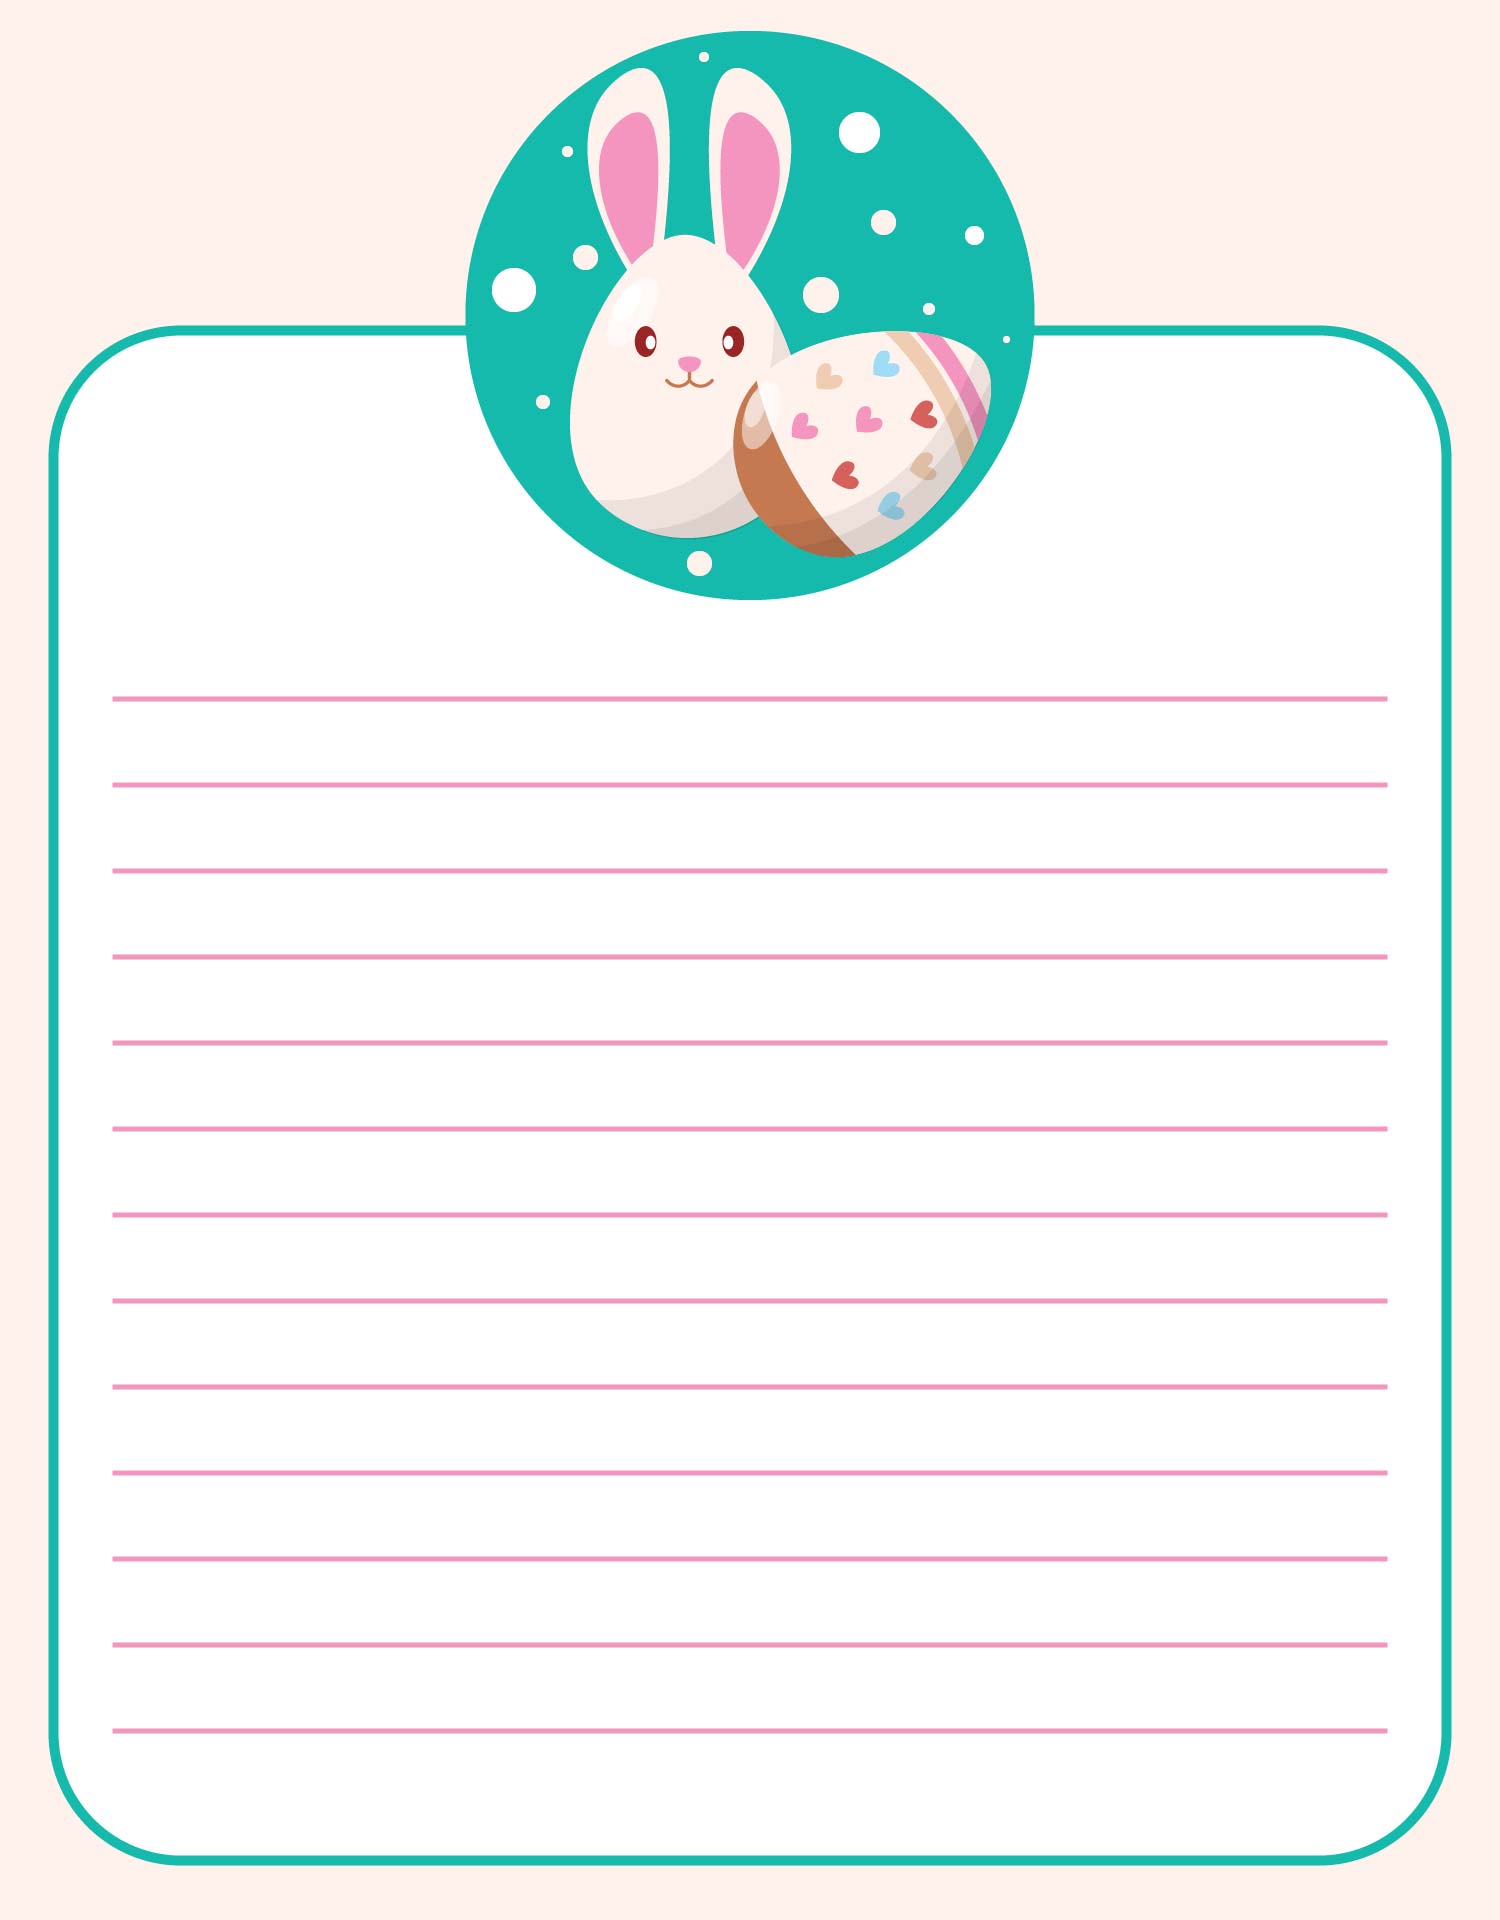 5-best-images-of-stationary-free-printable-easter-pages-free